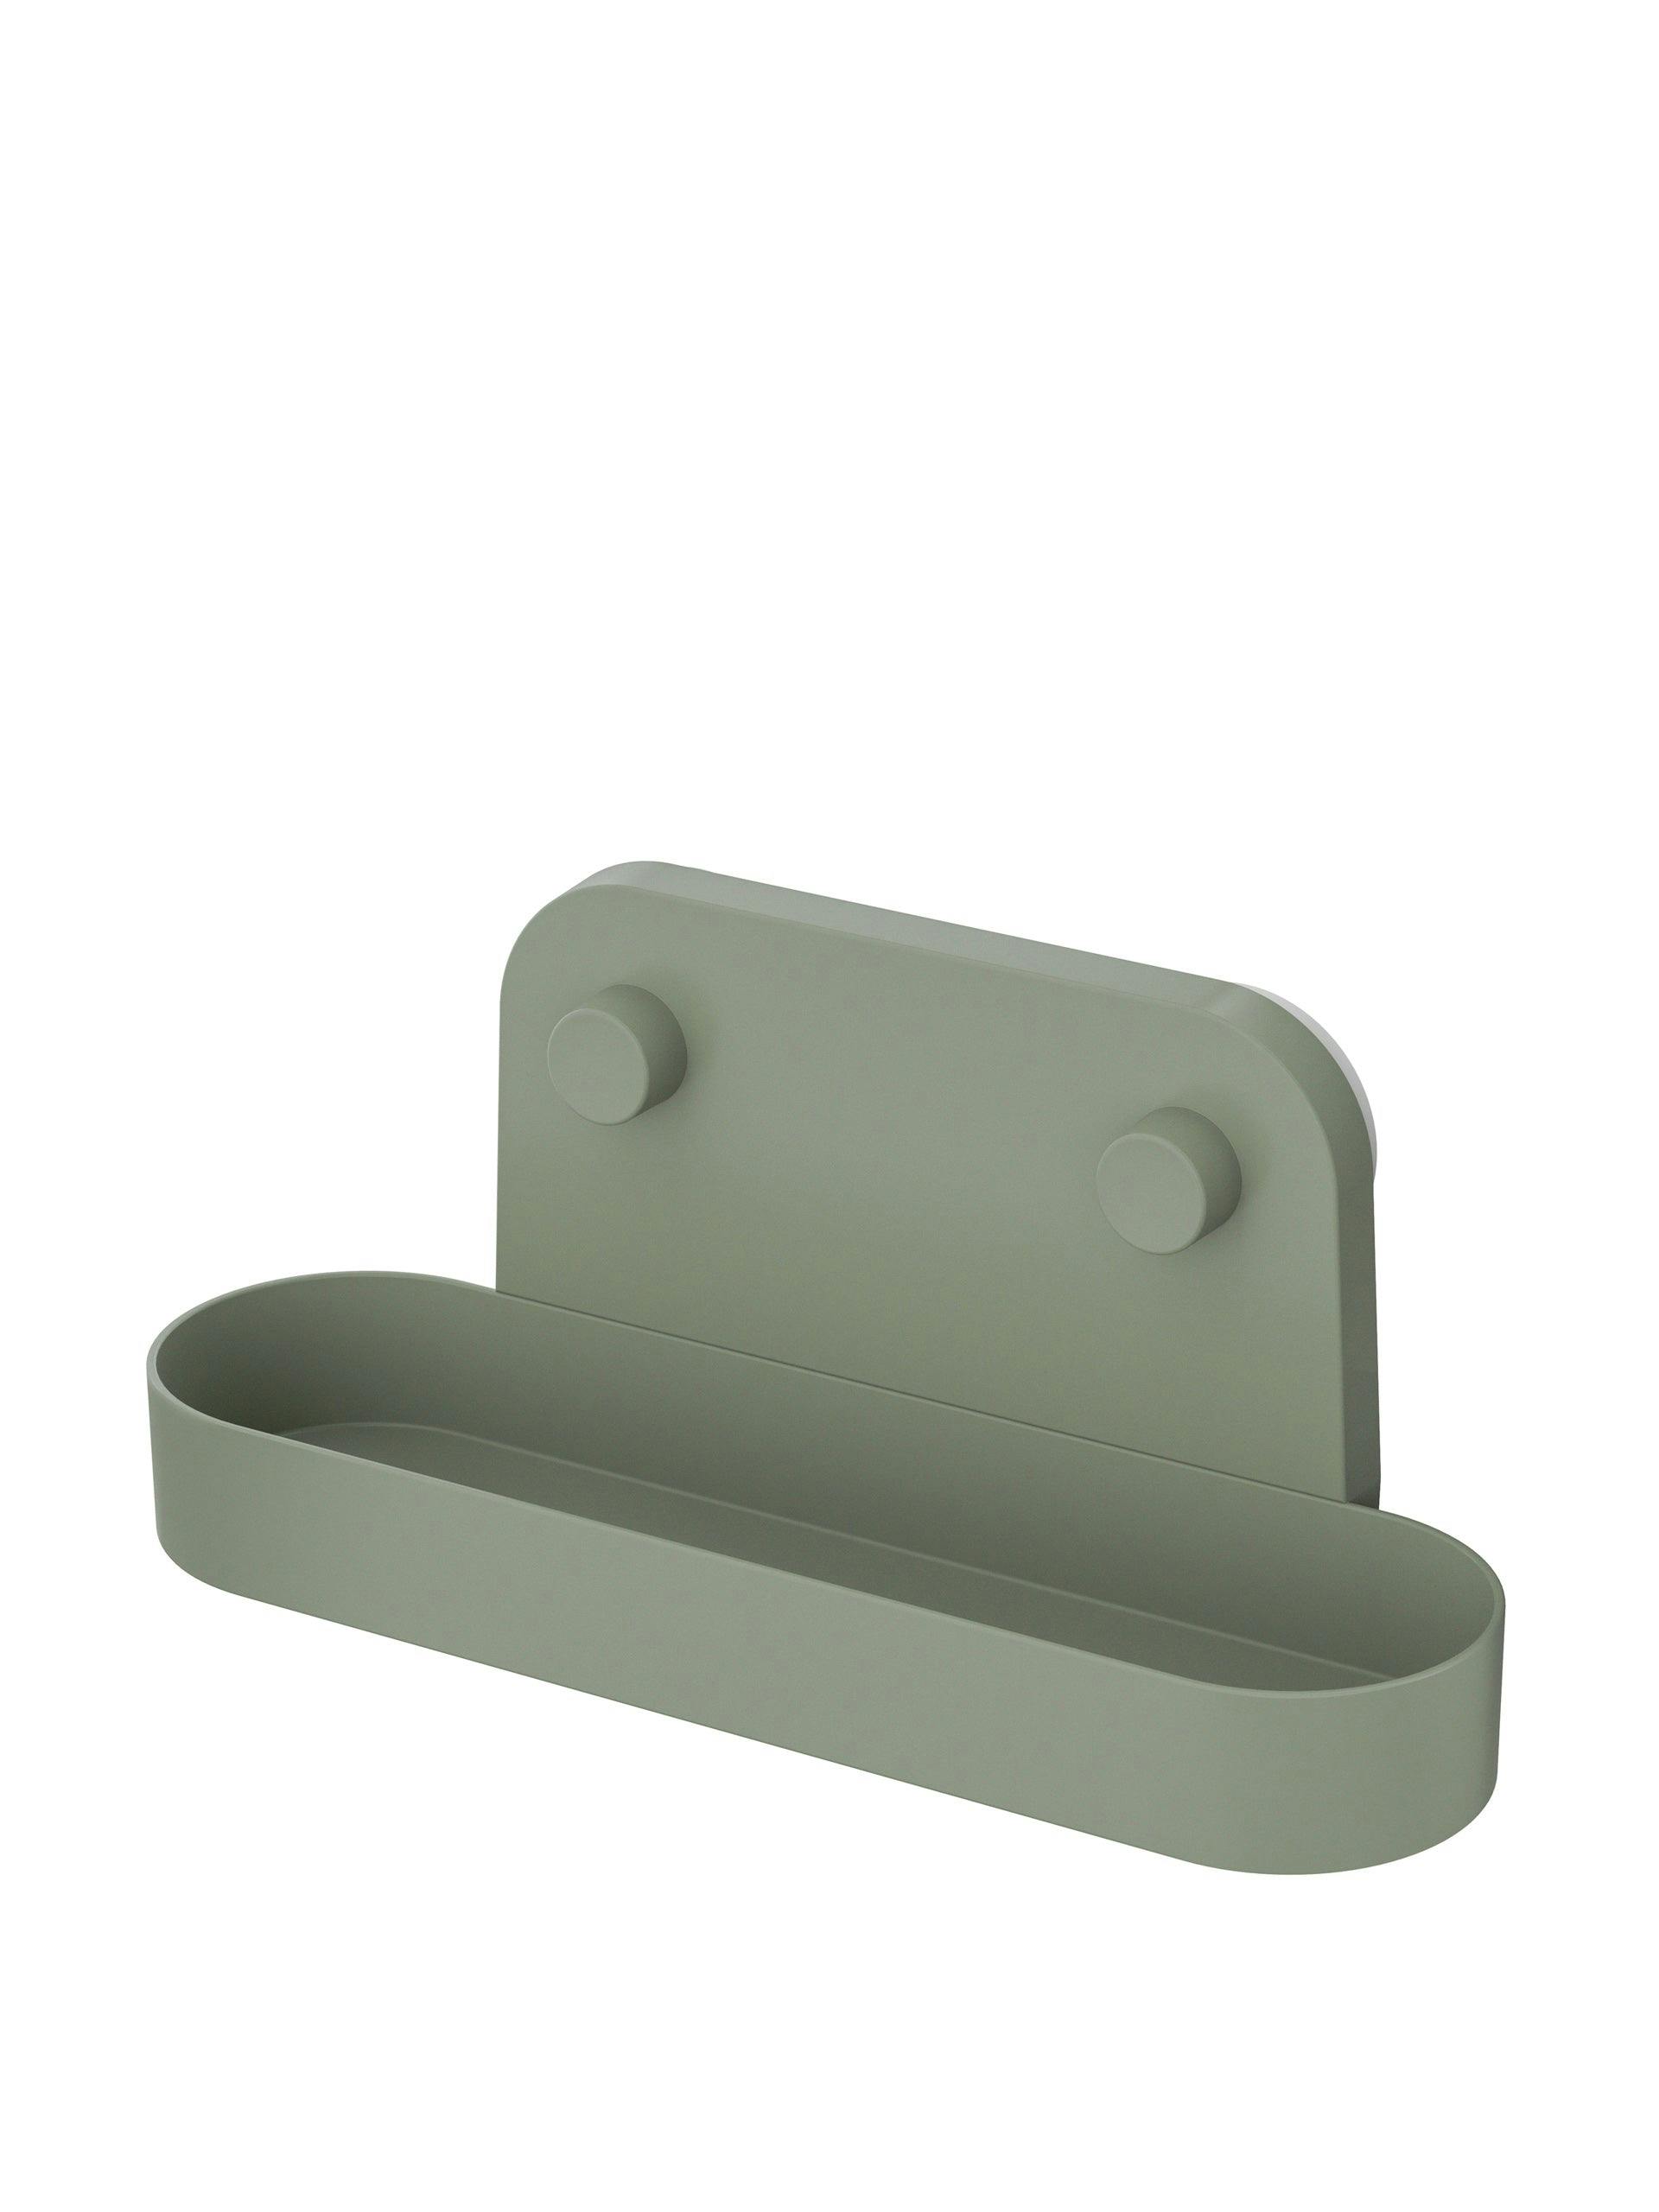 Wall shelf with suction cup